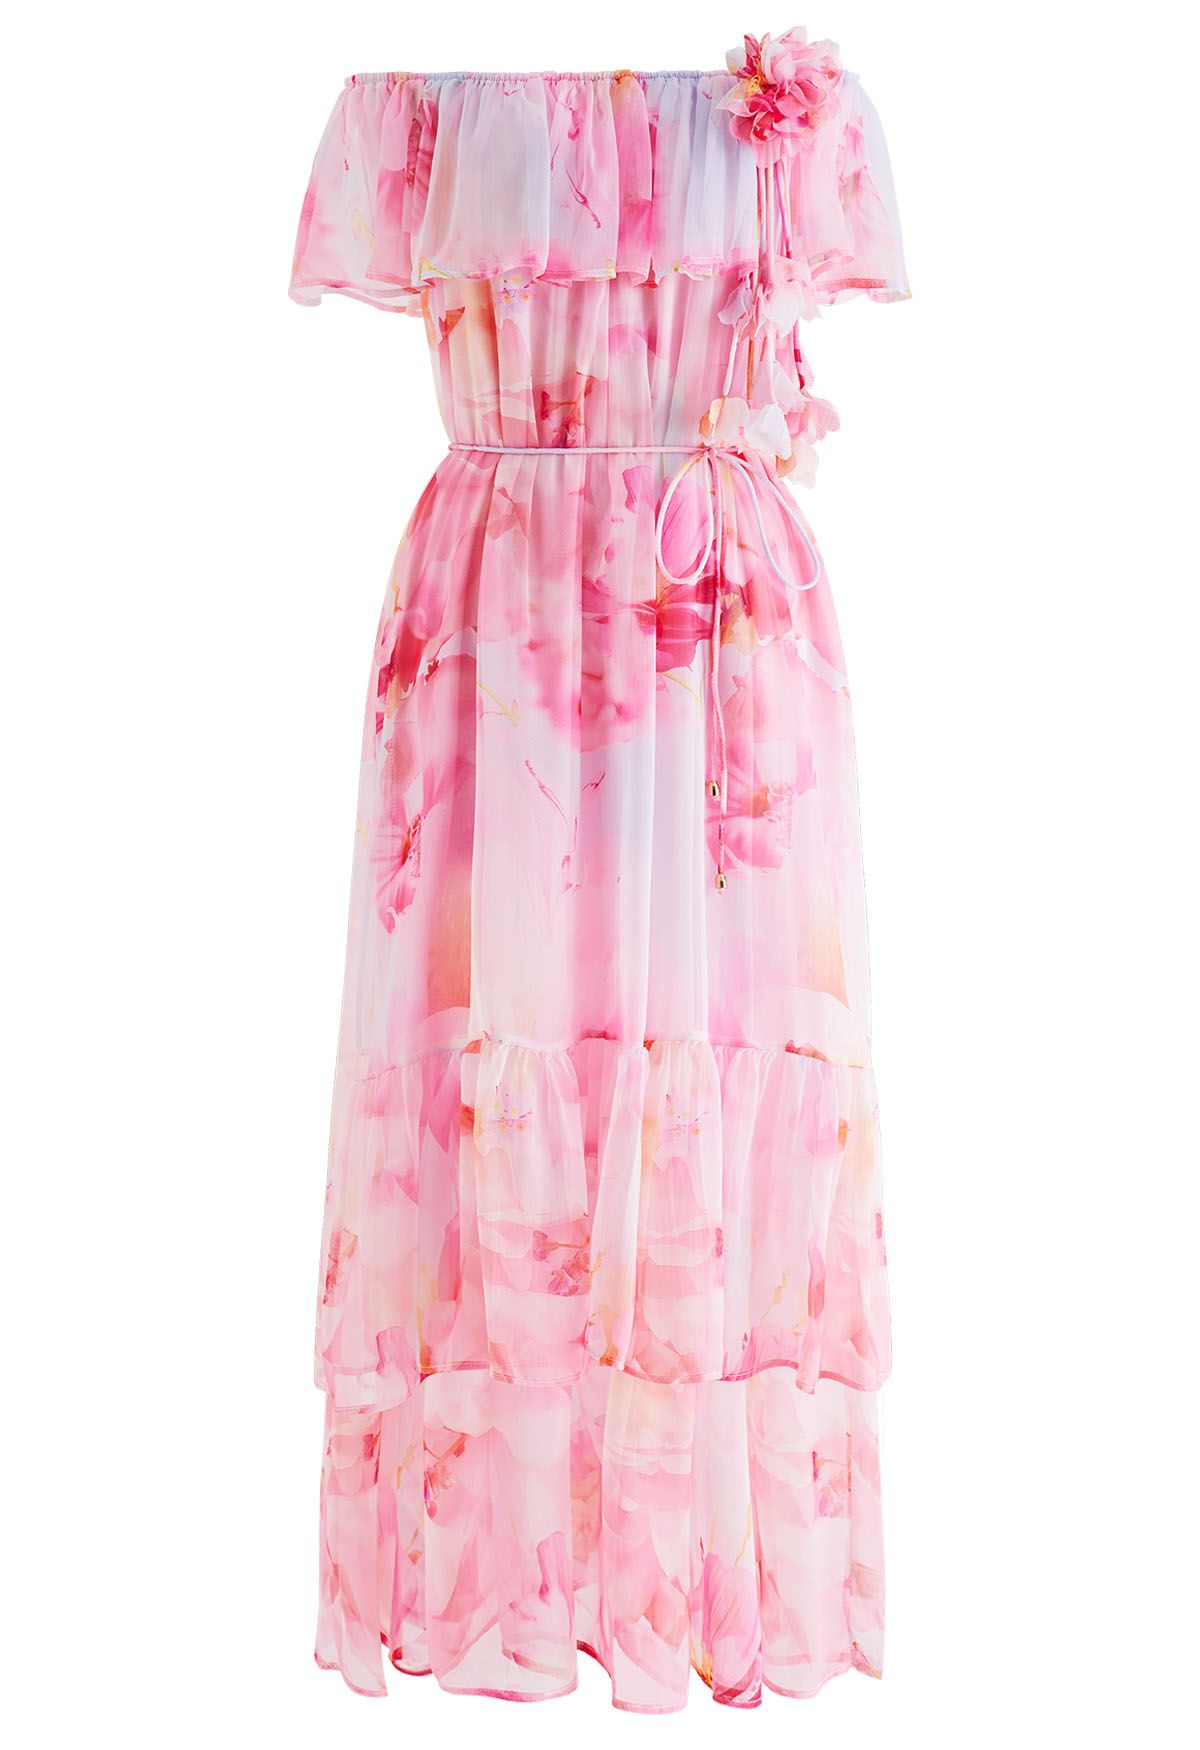 Floral Print Off-Shoulder Tiered Chiffon Dress in Pink